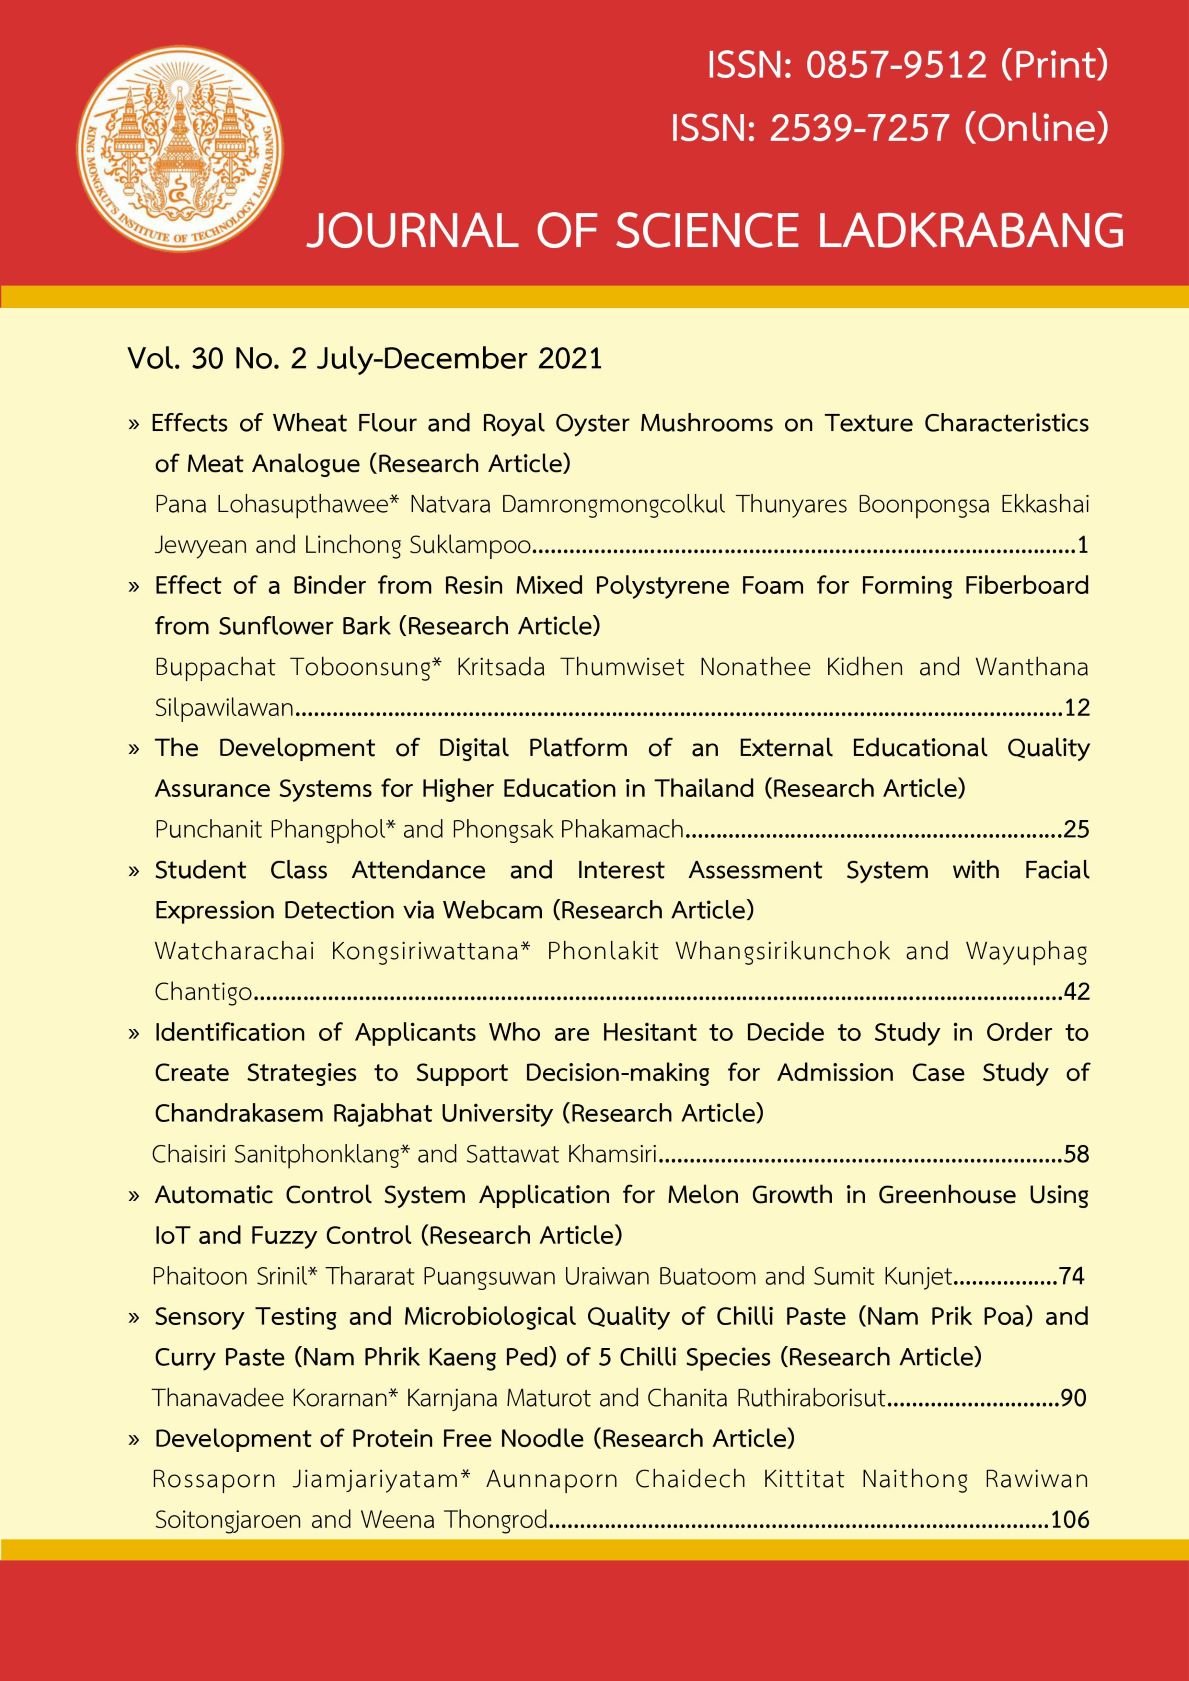 Image cover page Journal of Science Ladkrabang, Vol. 30 No. 2, July-December 2021